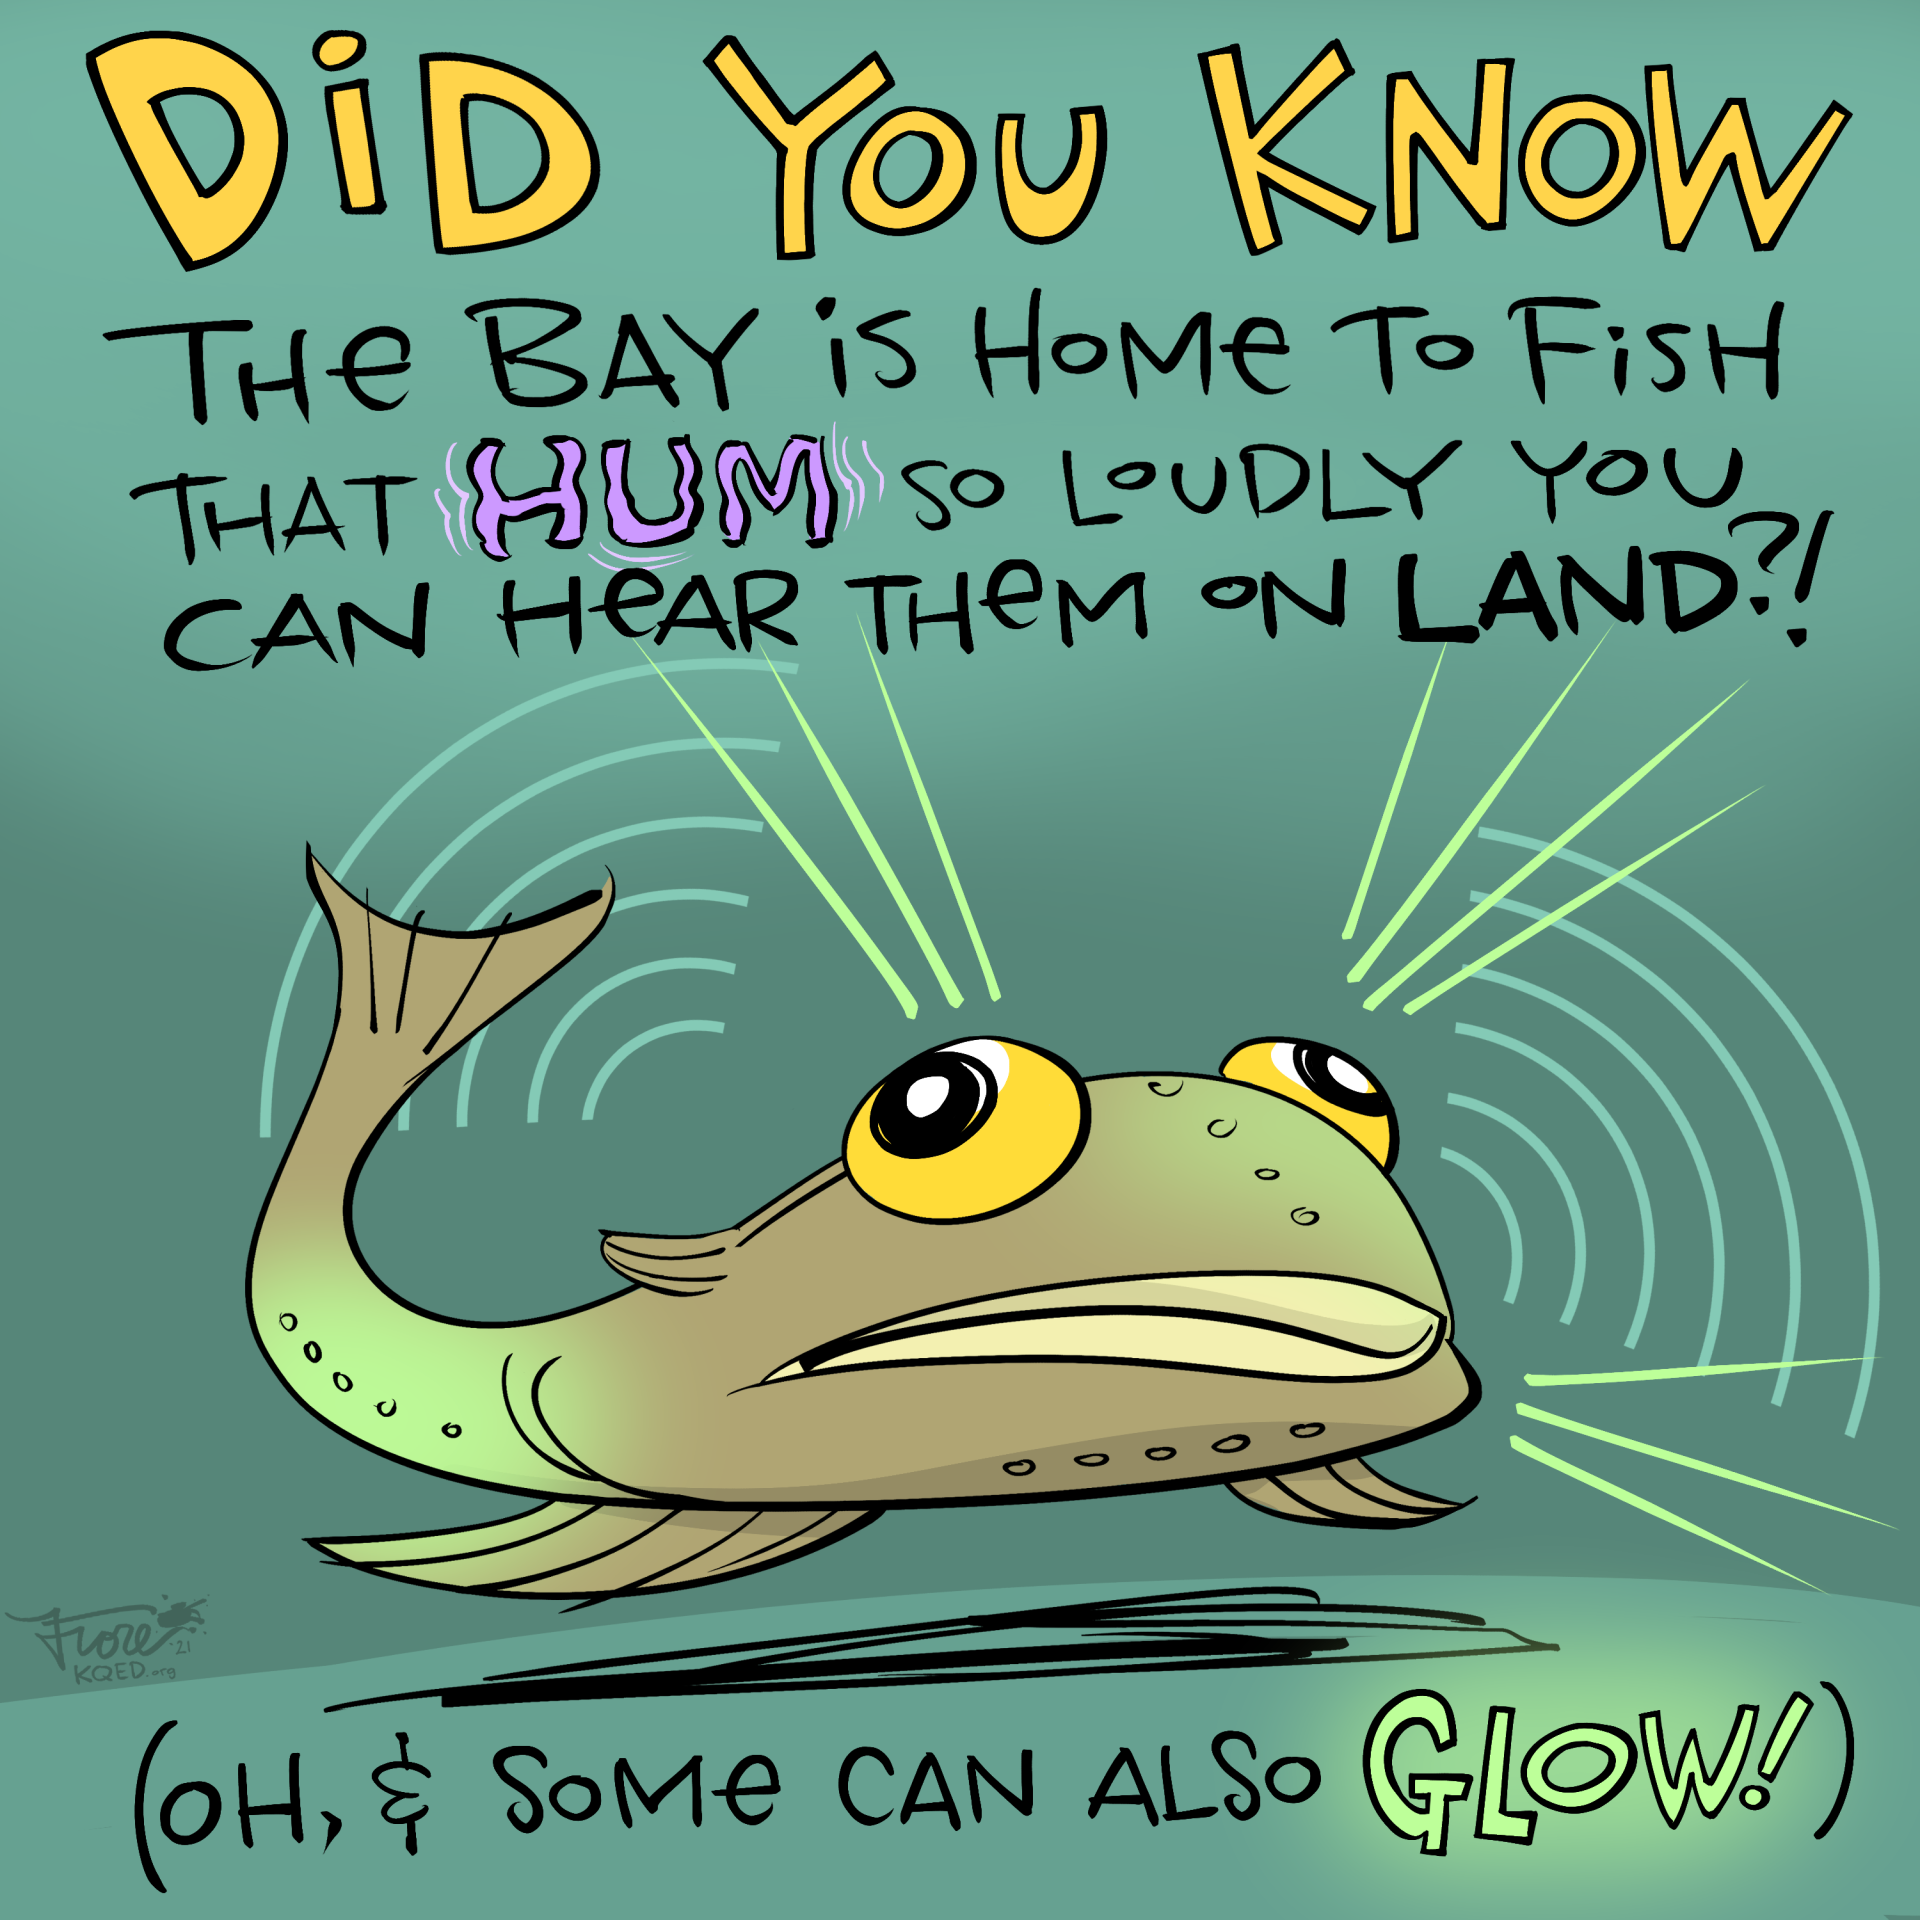 Cartoon: a wide-eyed glowing fish in the dark green waters of the Bay. Caption reads, "did you know the bay is home to fish that hum so loudly you can hear them on land?! Oh, and some can also glow!"